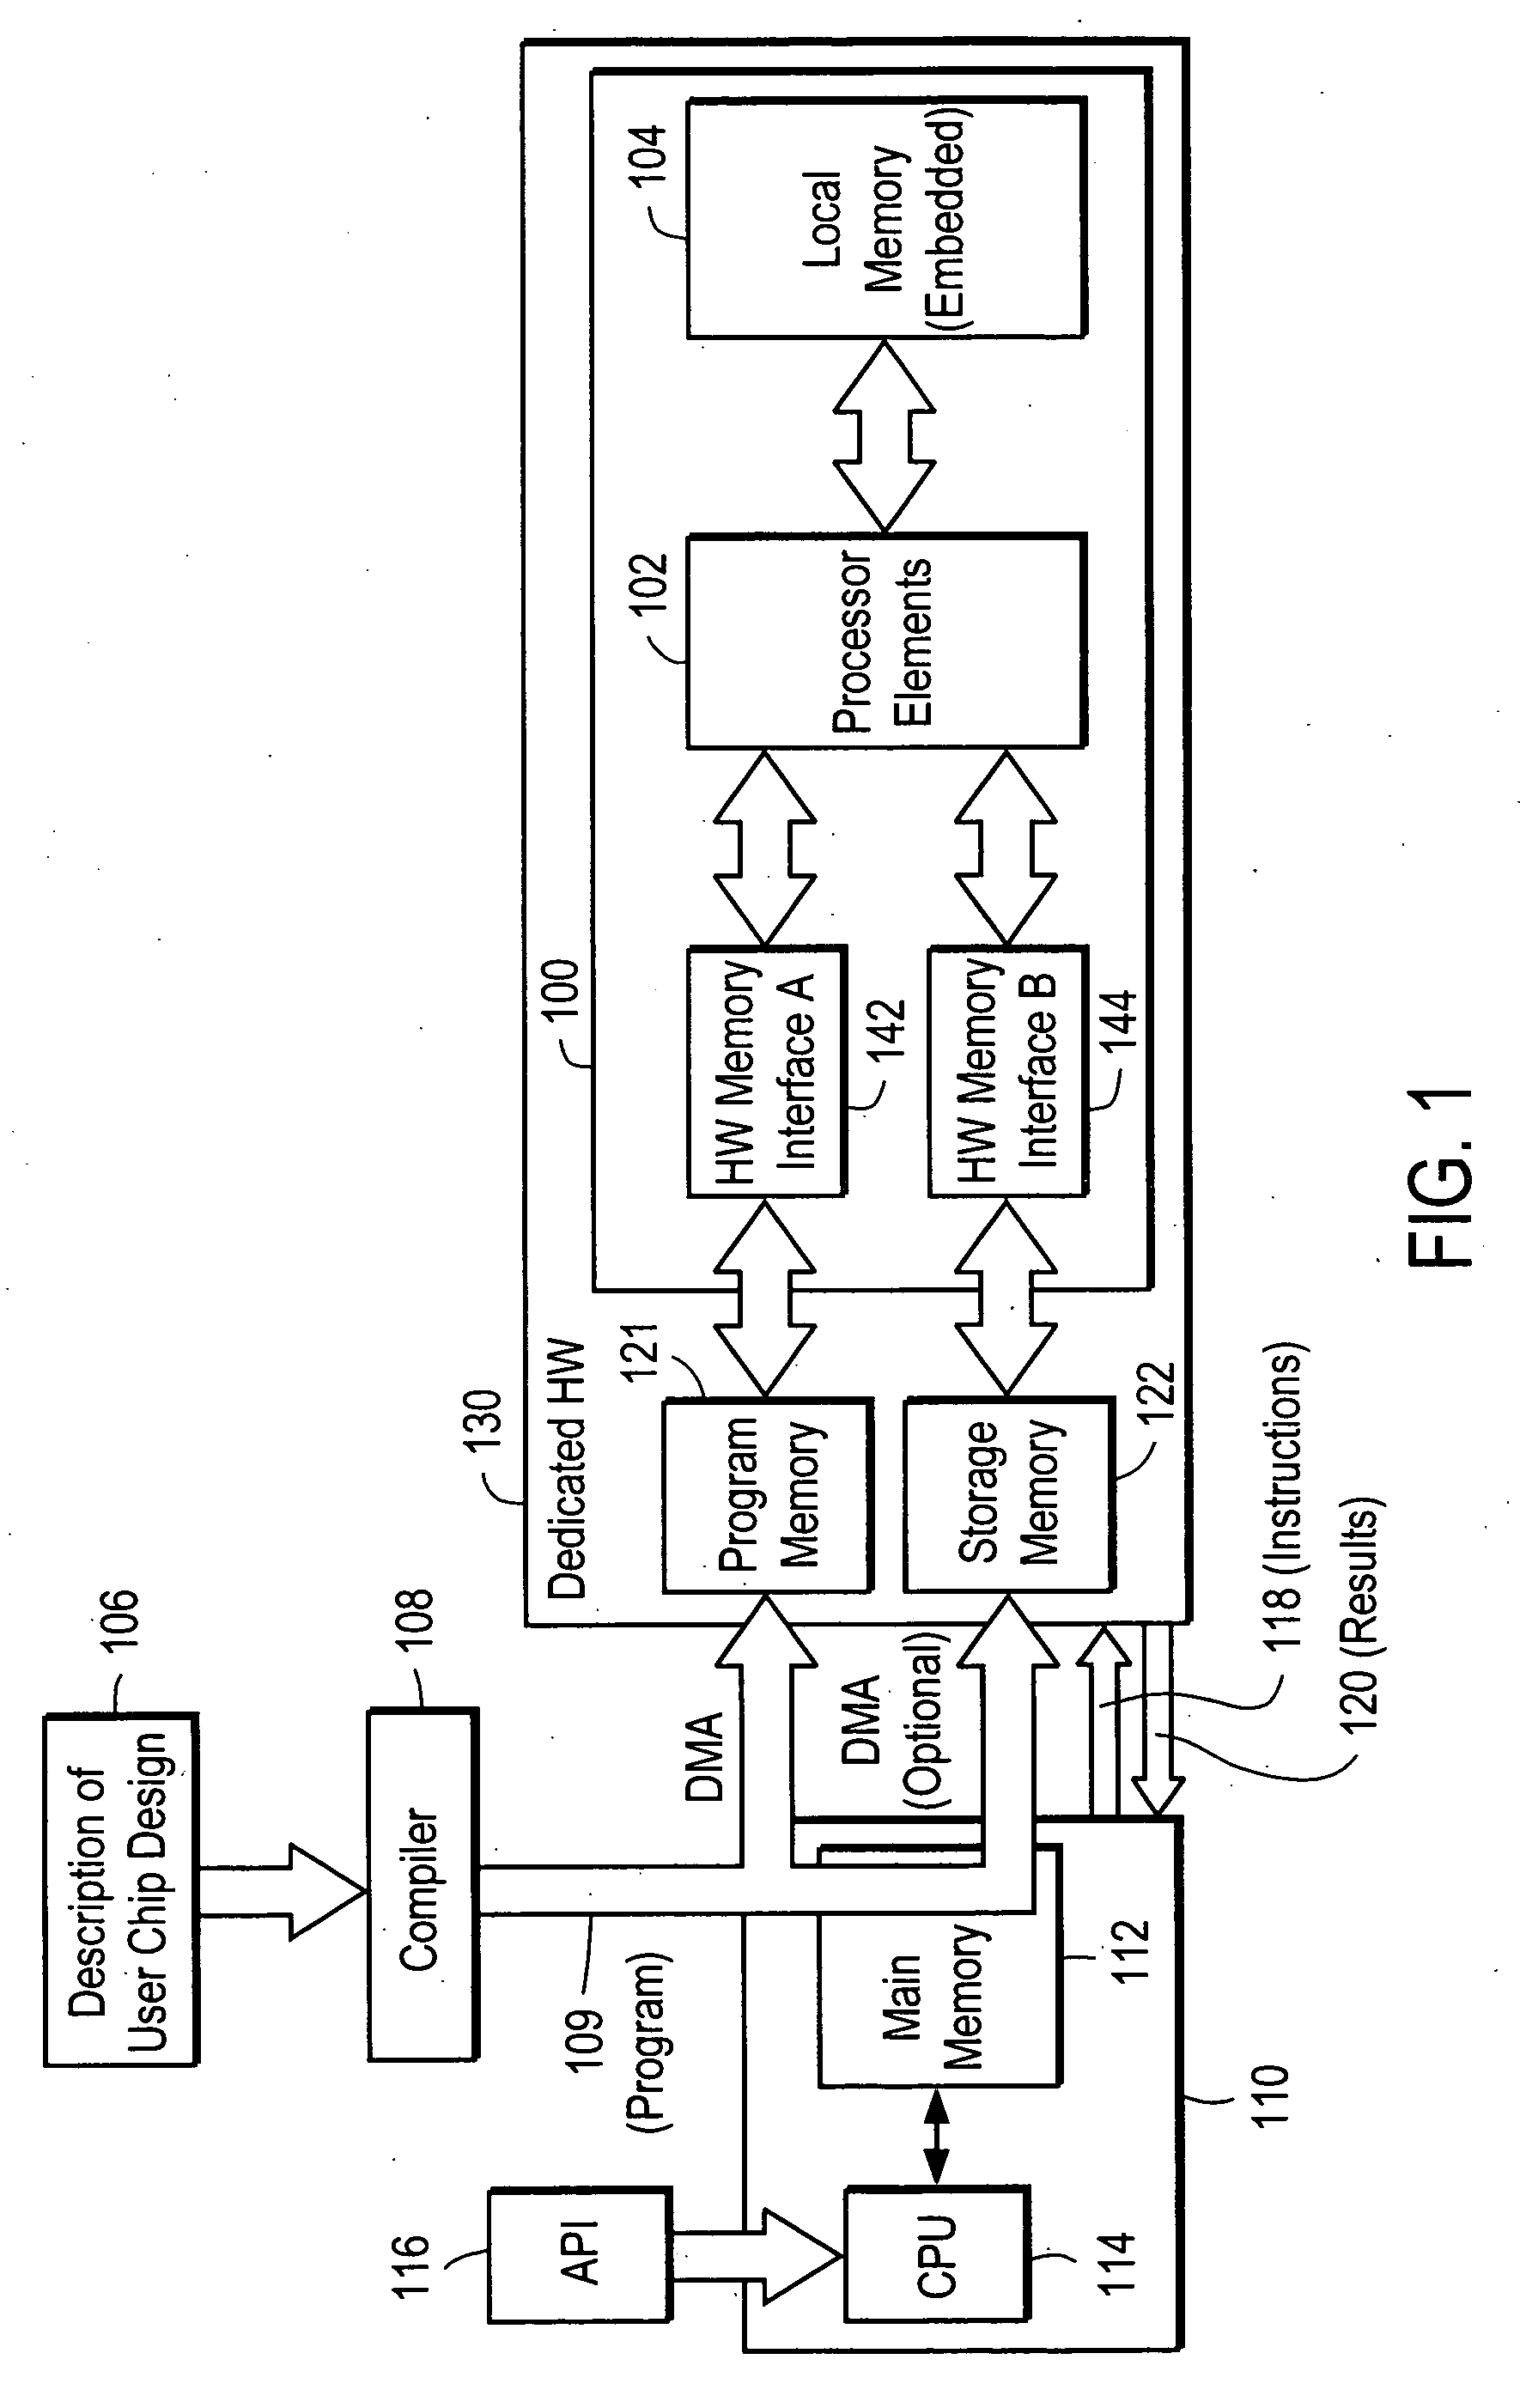 Partitioning of tasks for execution by a VLIW hardware acceleration system